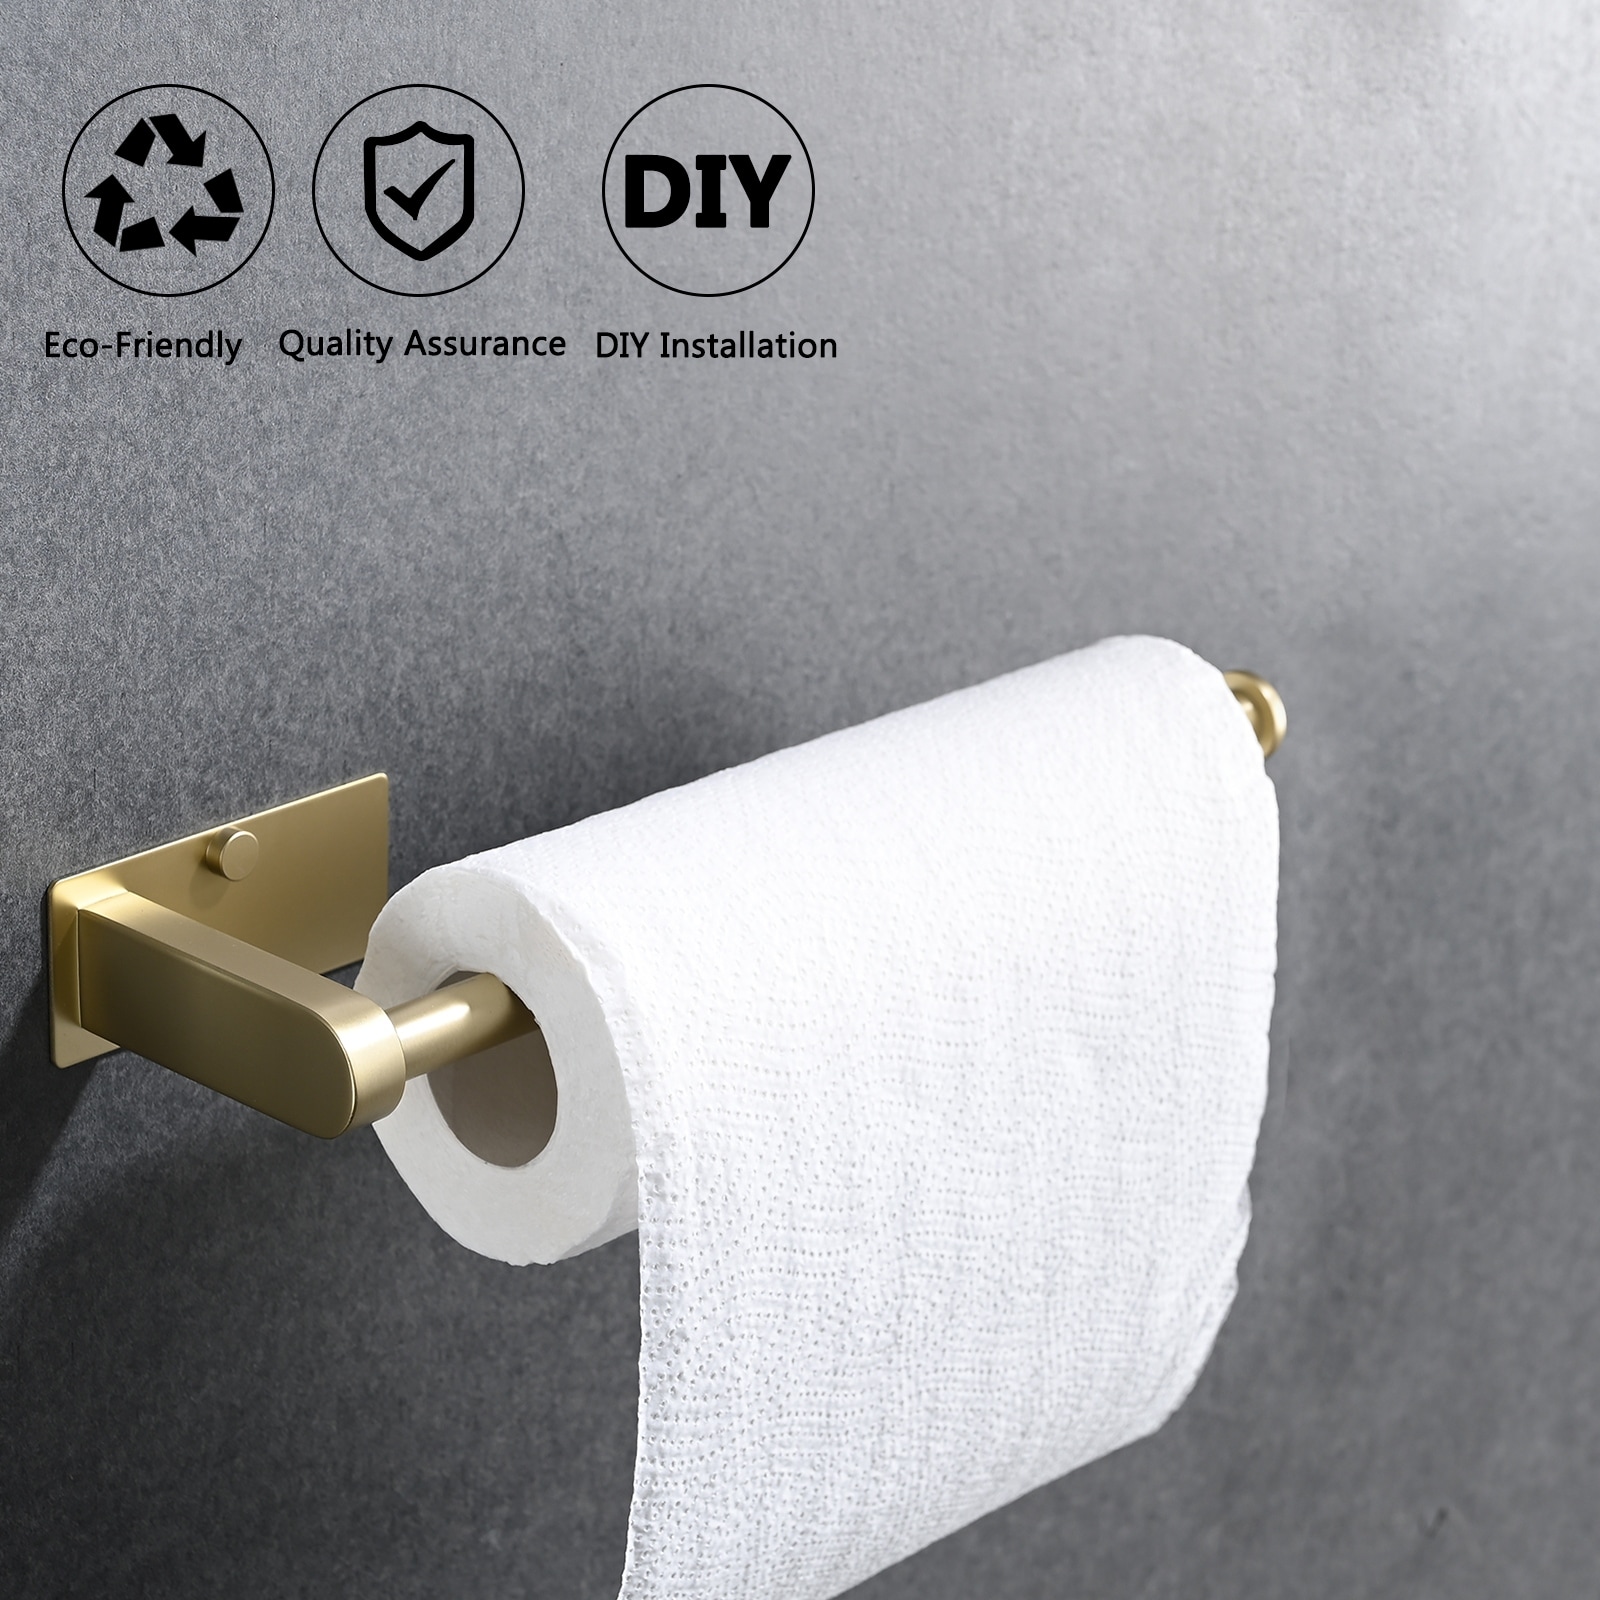 https://ak1.ostkcdn.com/images/products/is/images/direct/6872bda6835dce7ef388df25968759baa5cb20e8/2-Piece-Under-Cabinet-Wall-Mount-Paper-Towel-Holder.jpg